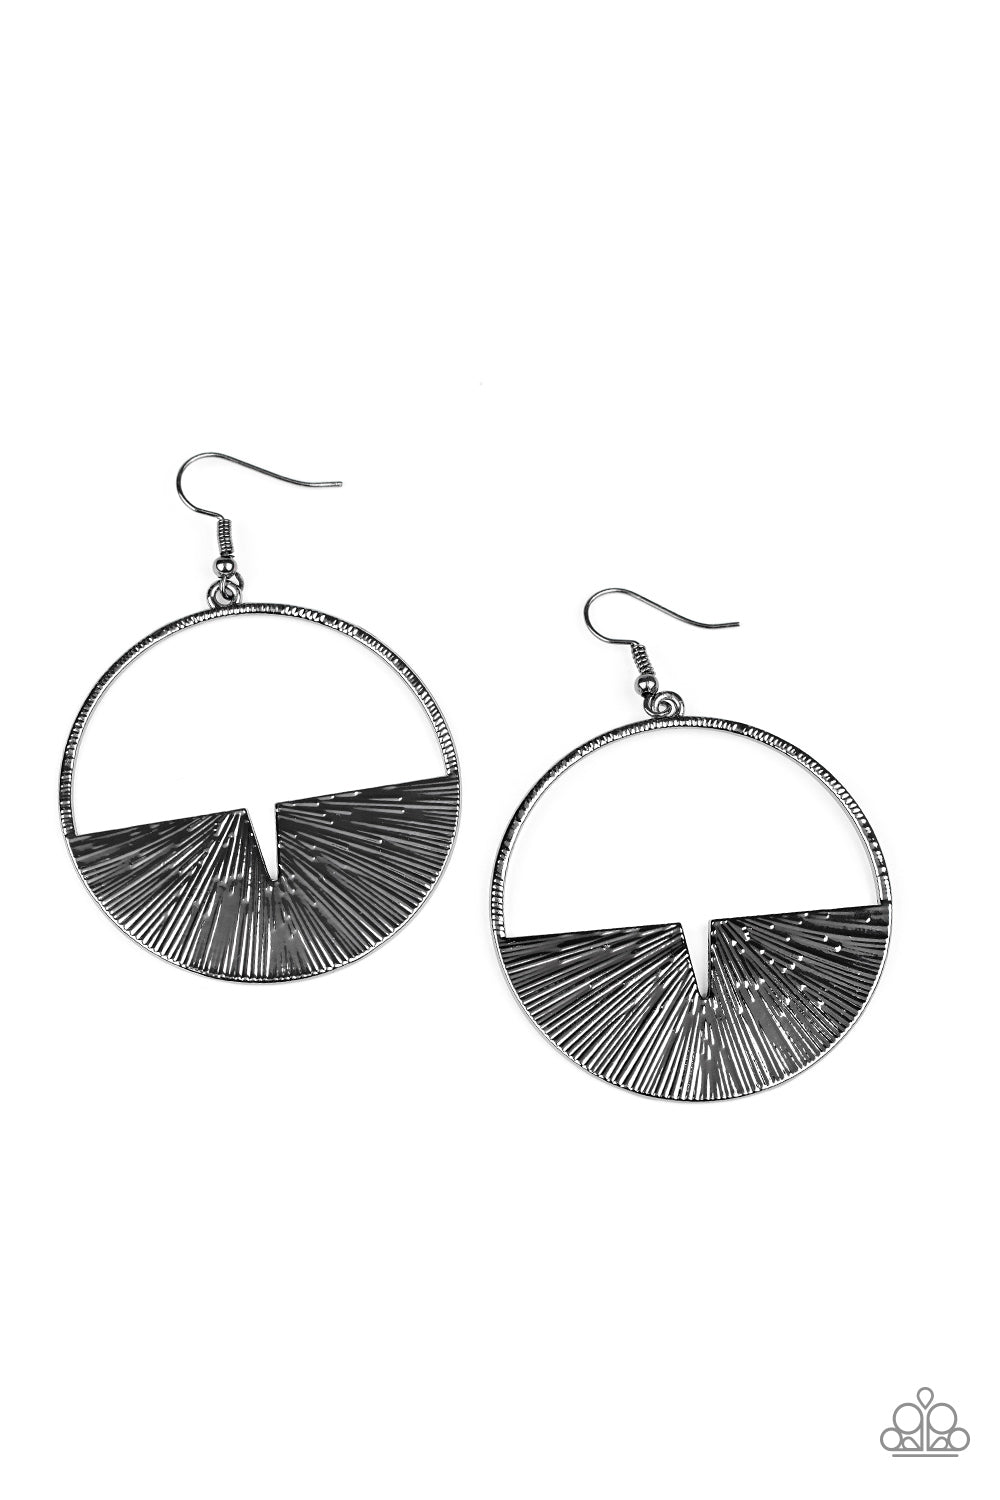 Paparazzi Accessories Reimagined Refinement - Black Earrings - Lady T Accessories